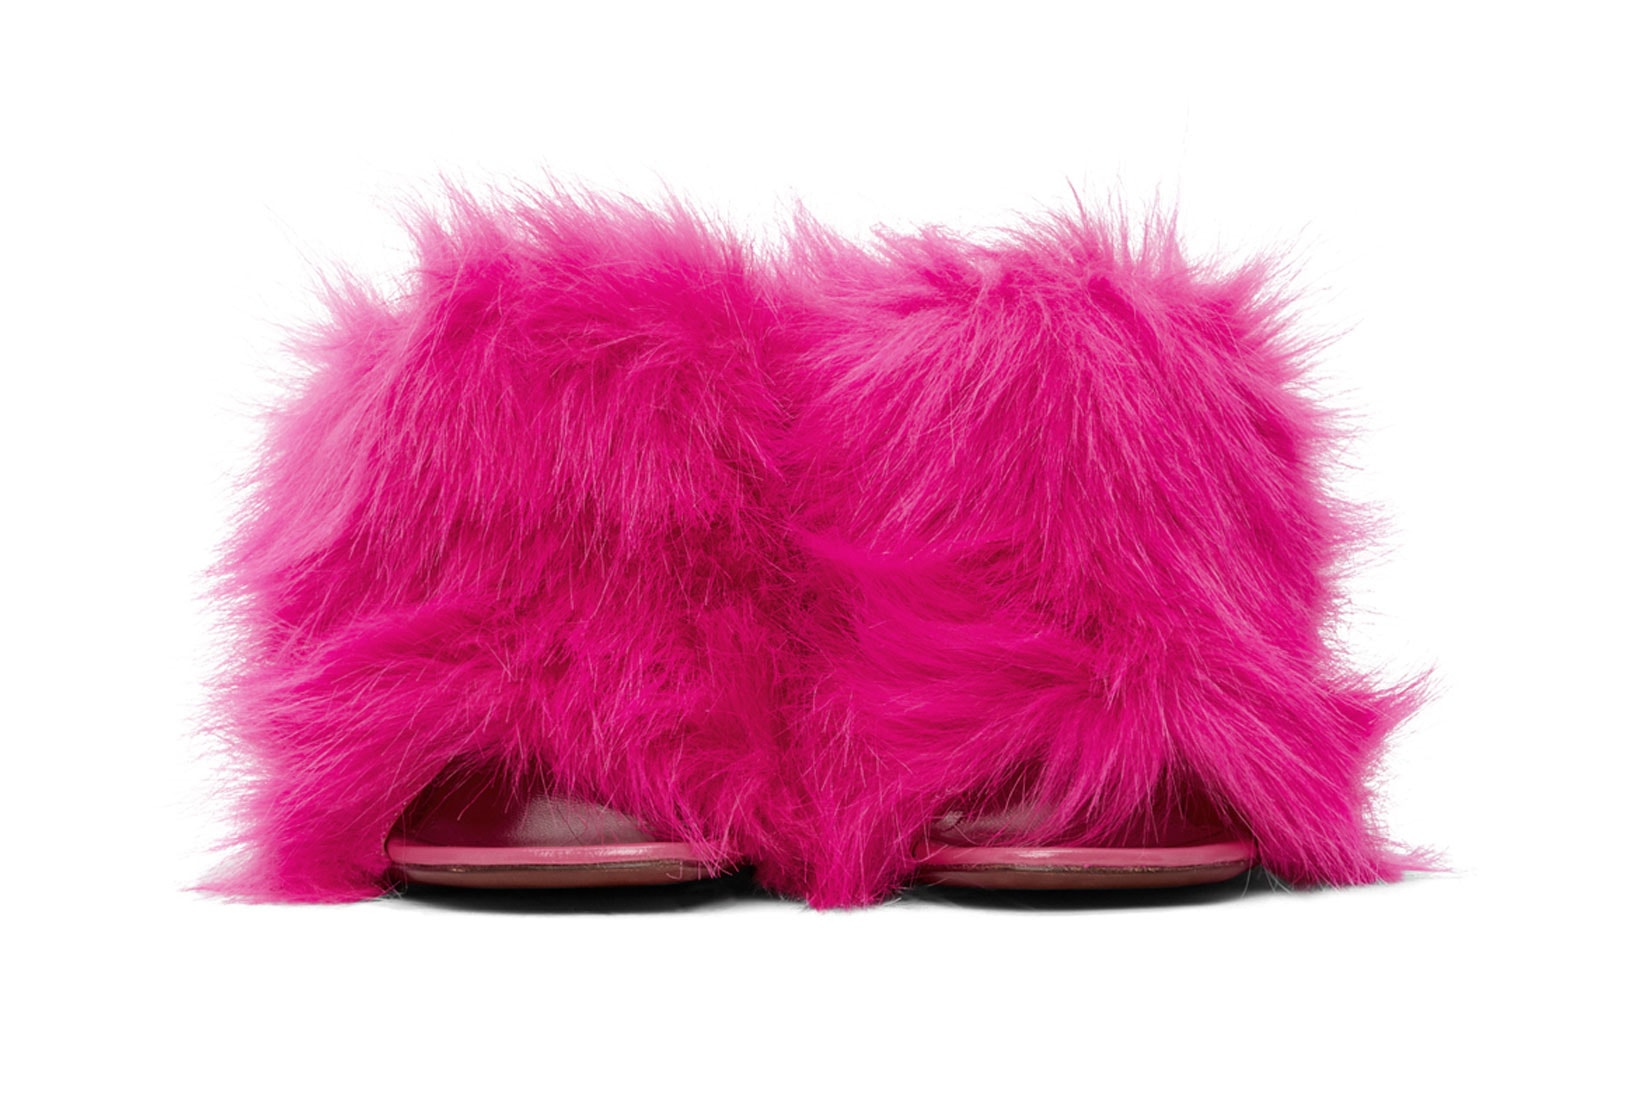 vetements pink faux fur mules heels valentines day gifts 